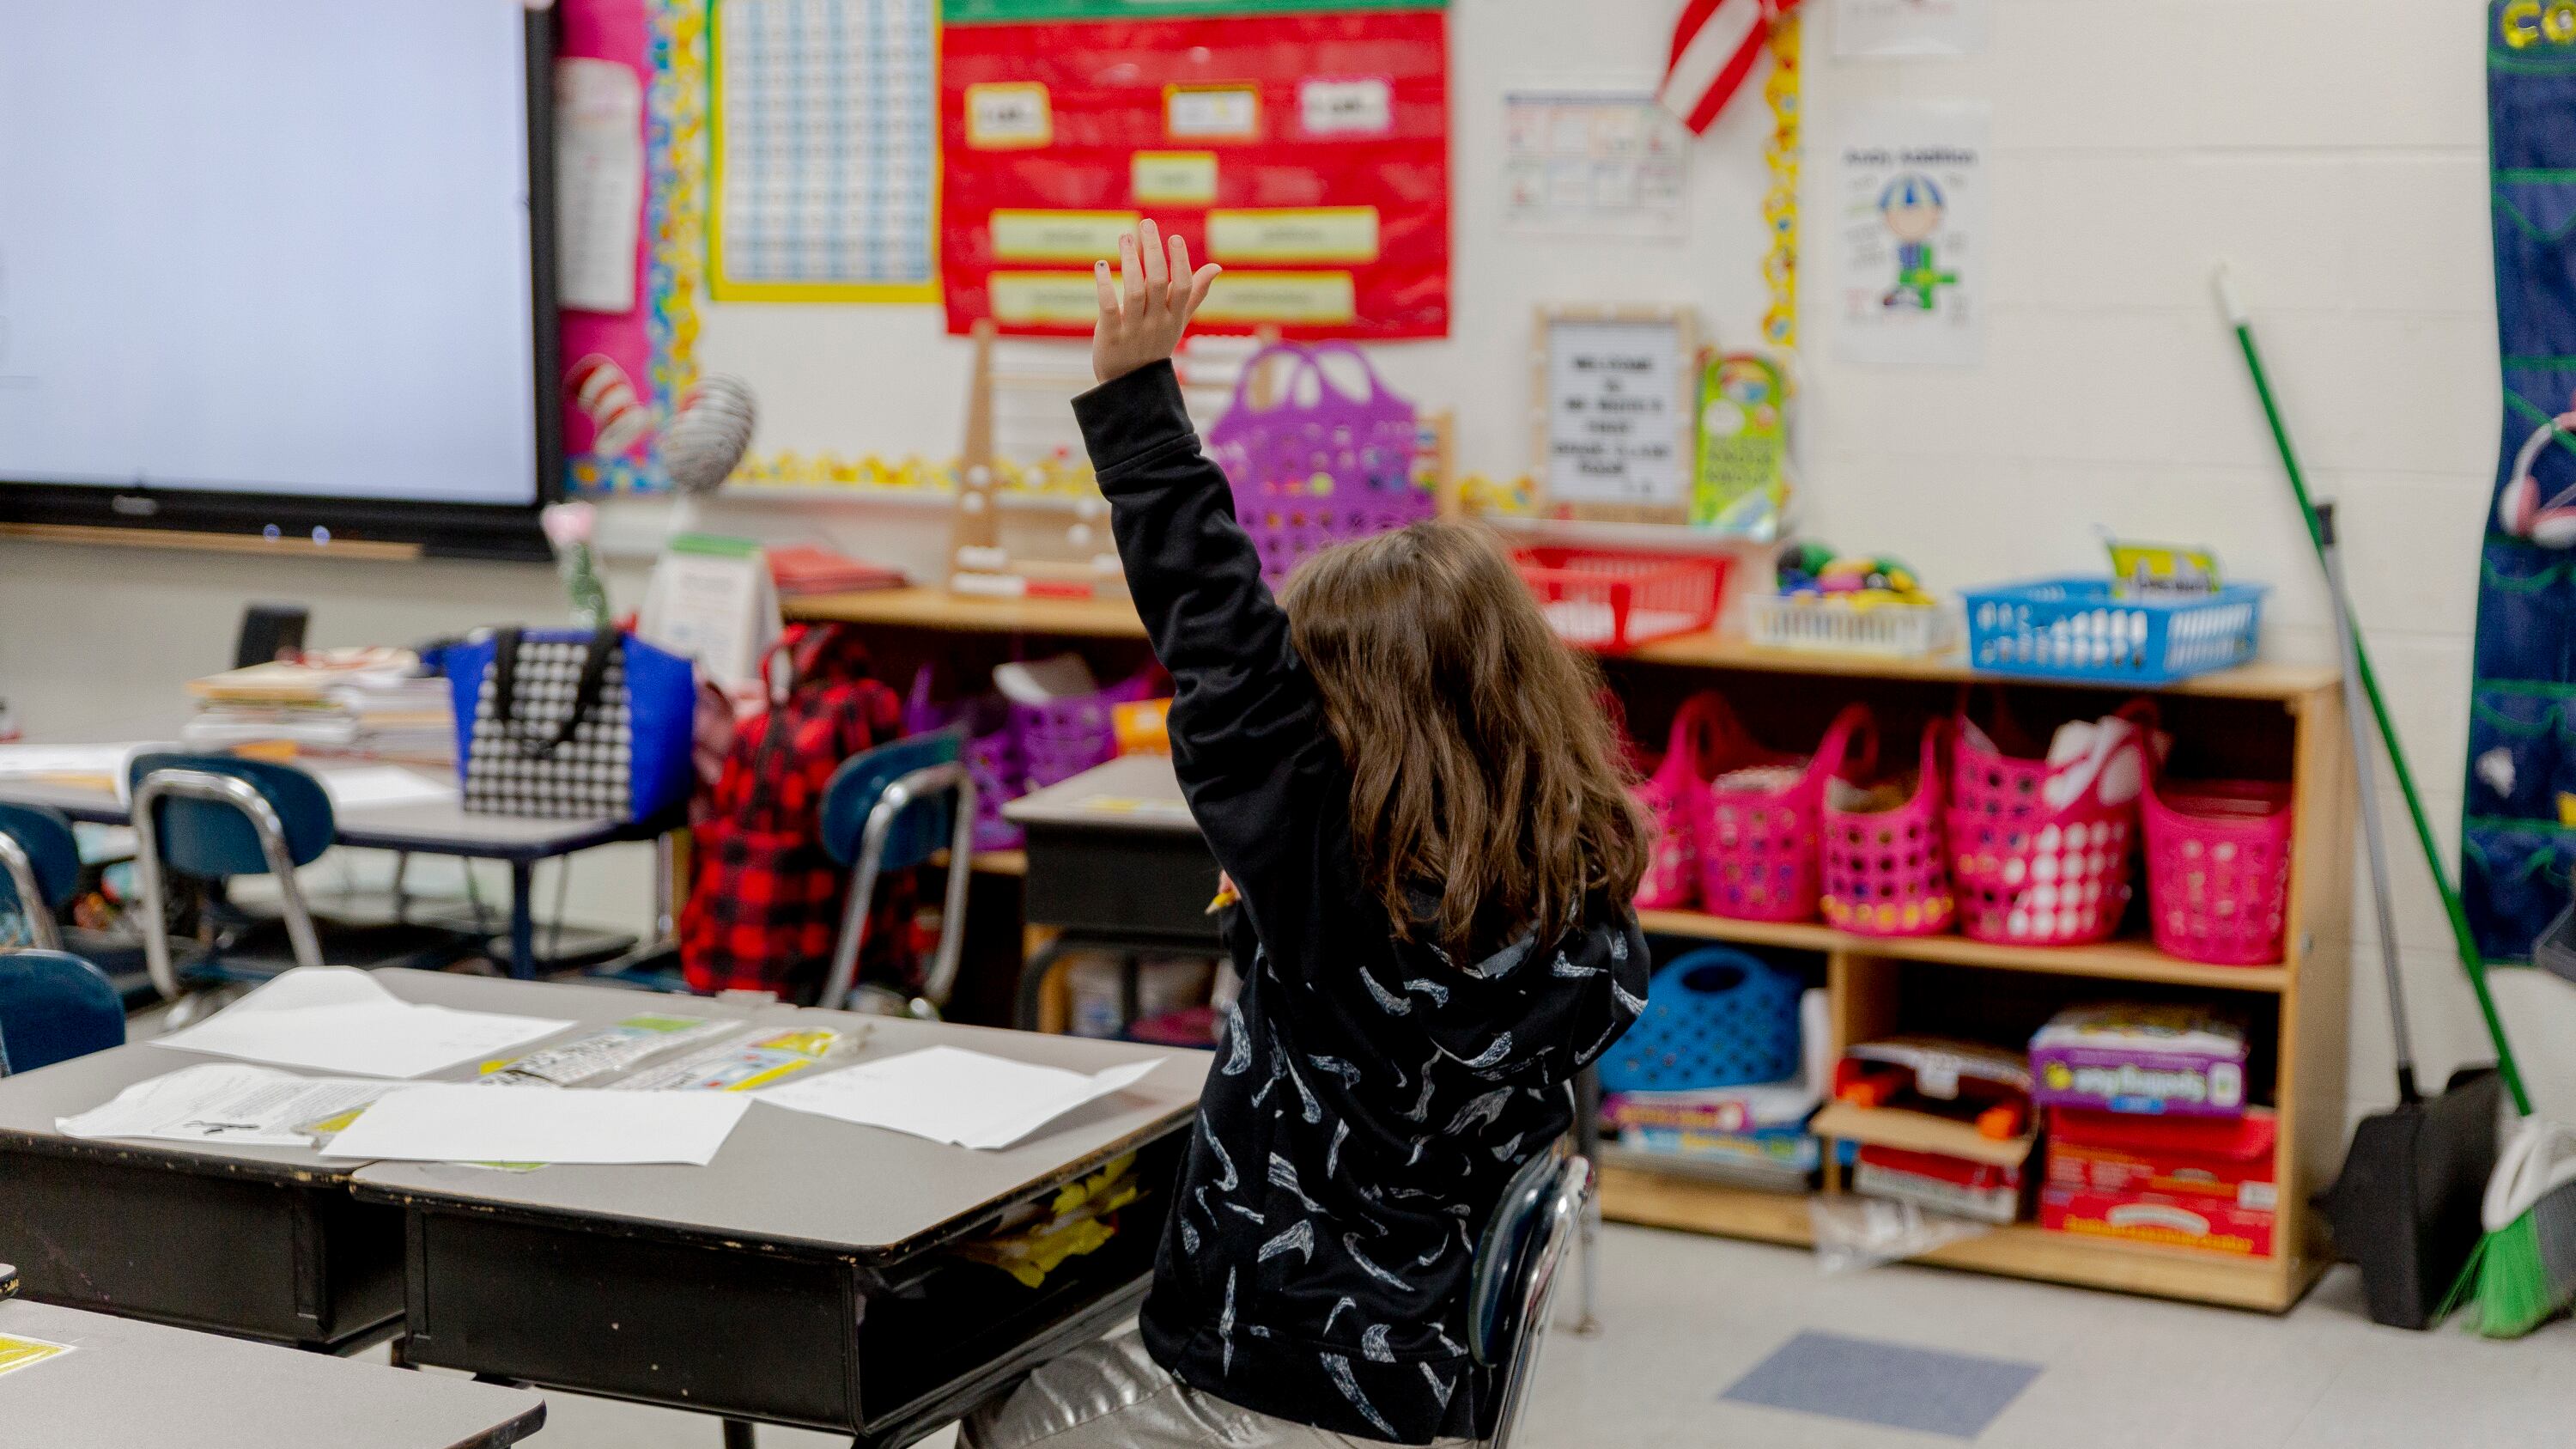 A second-grader raises her hand in a classroom.